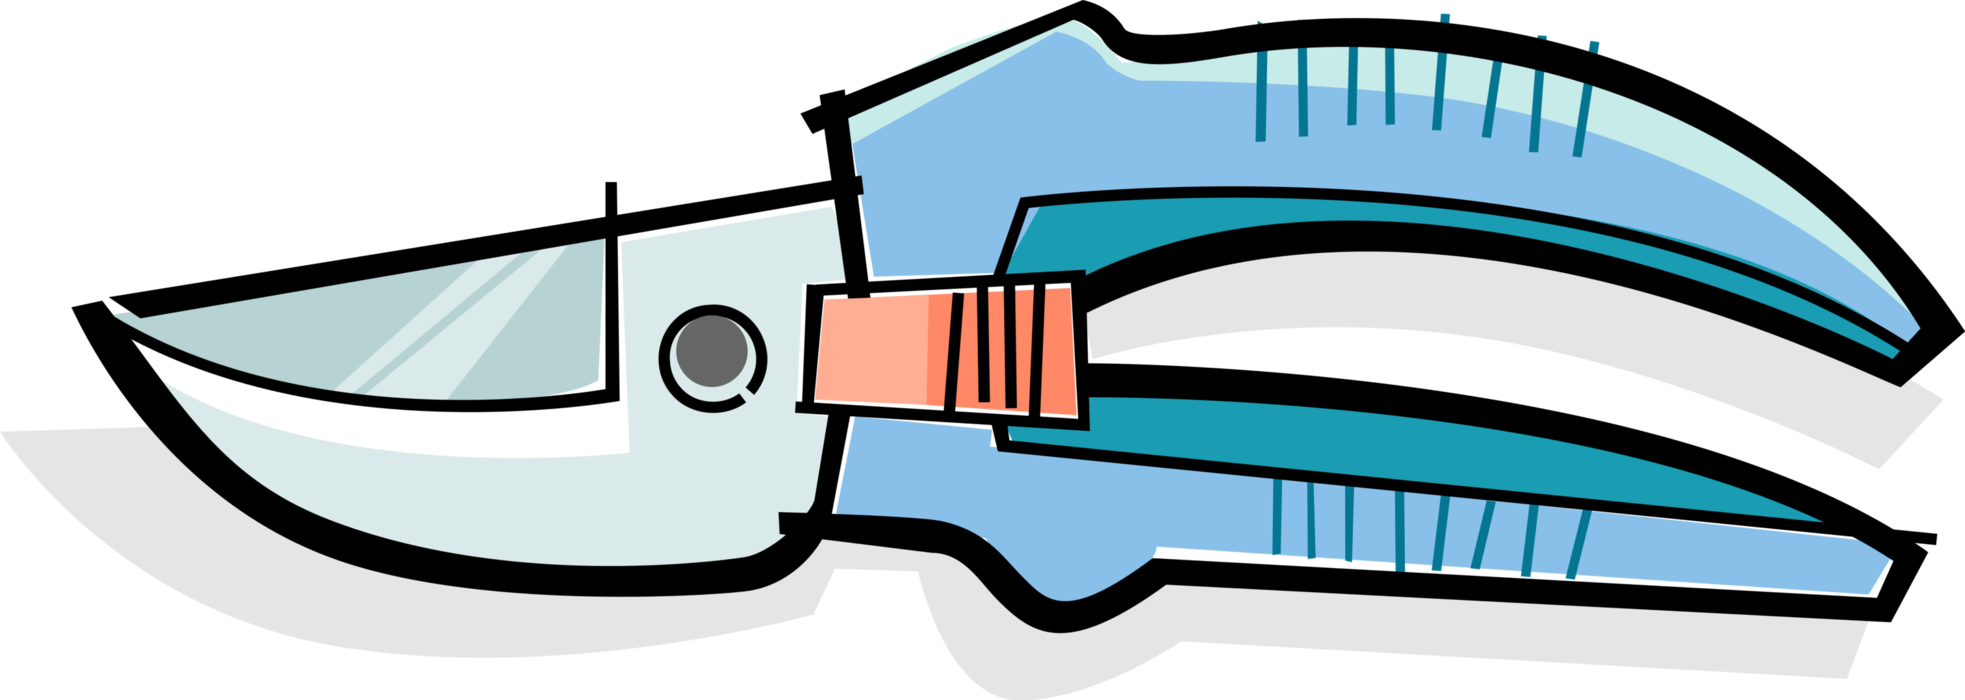 Vector Illustration of Pruning Shears Hand Tool used for Cutting Branches and Foliage